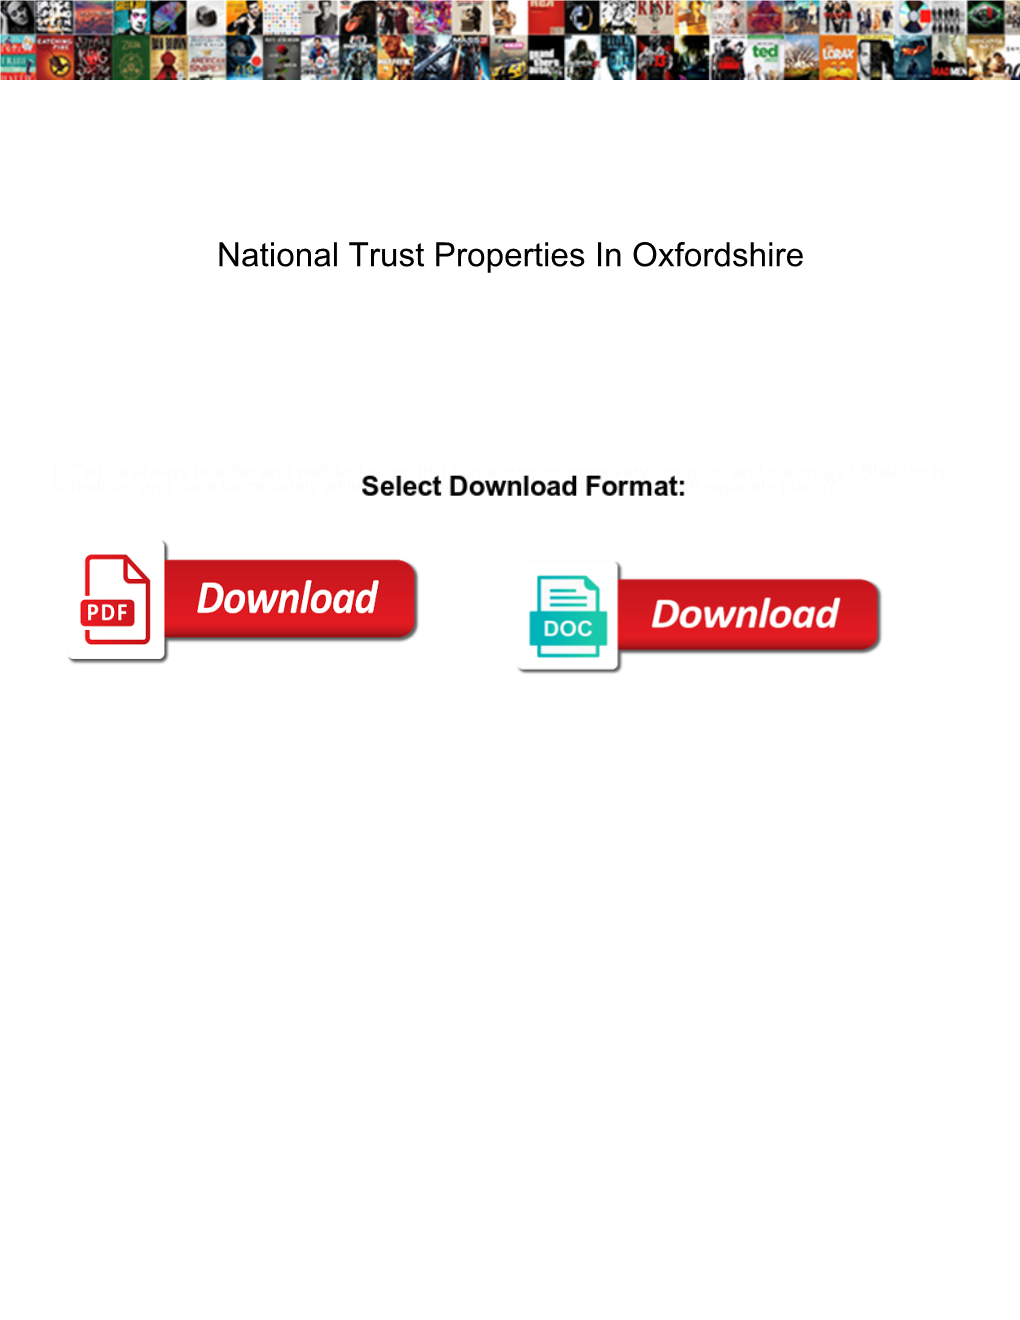 National Trust Properties in Oxfordshire